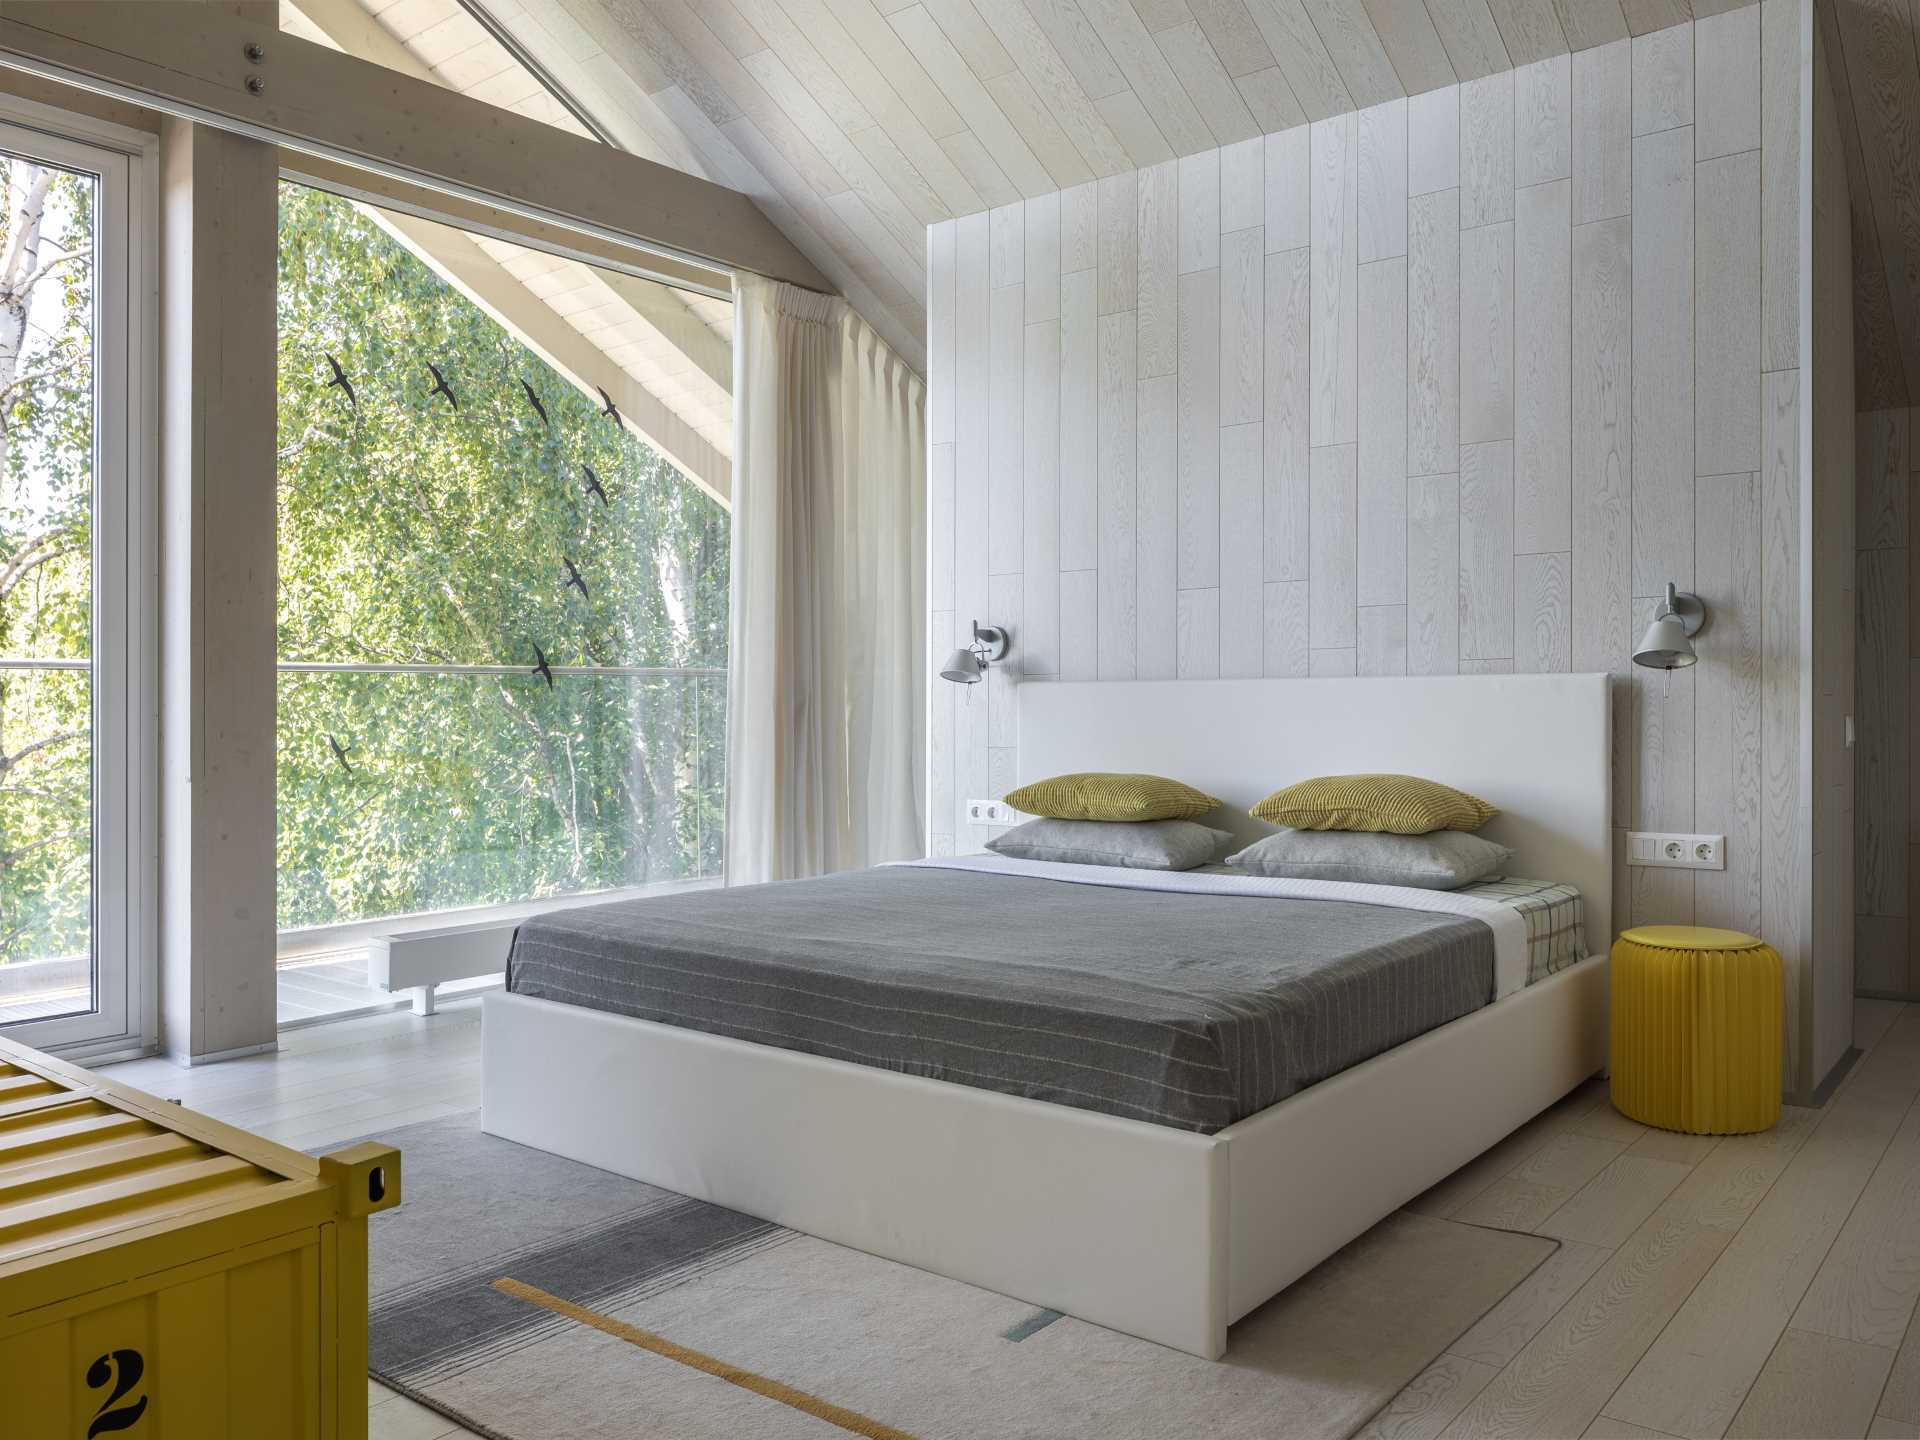 A contemporary bedroom with light wood walls and a white bed frame.